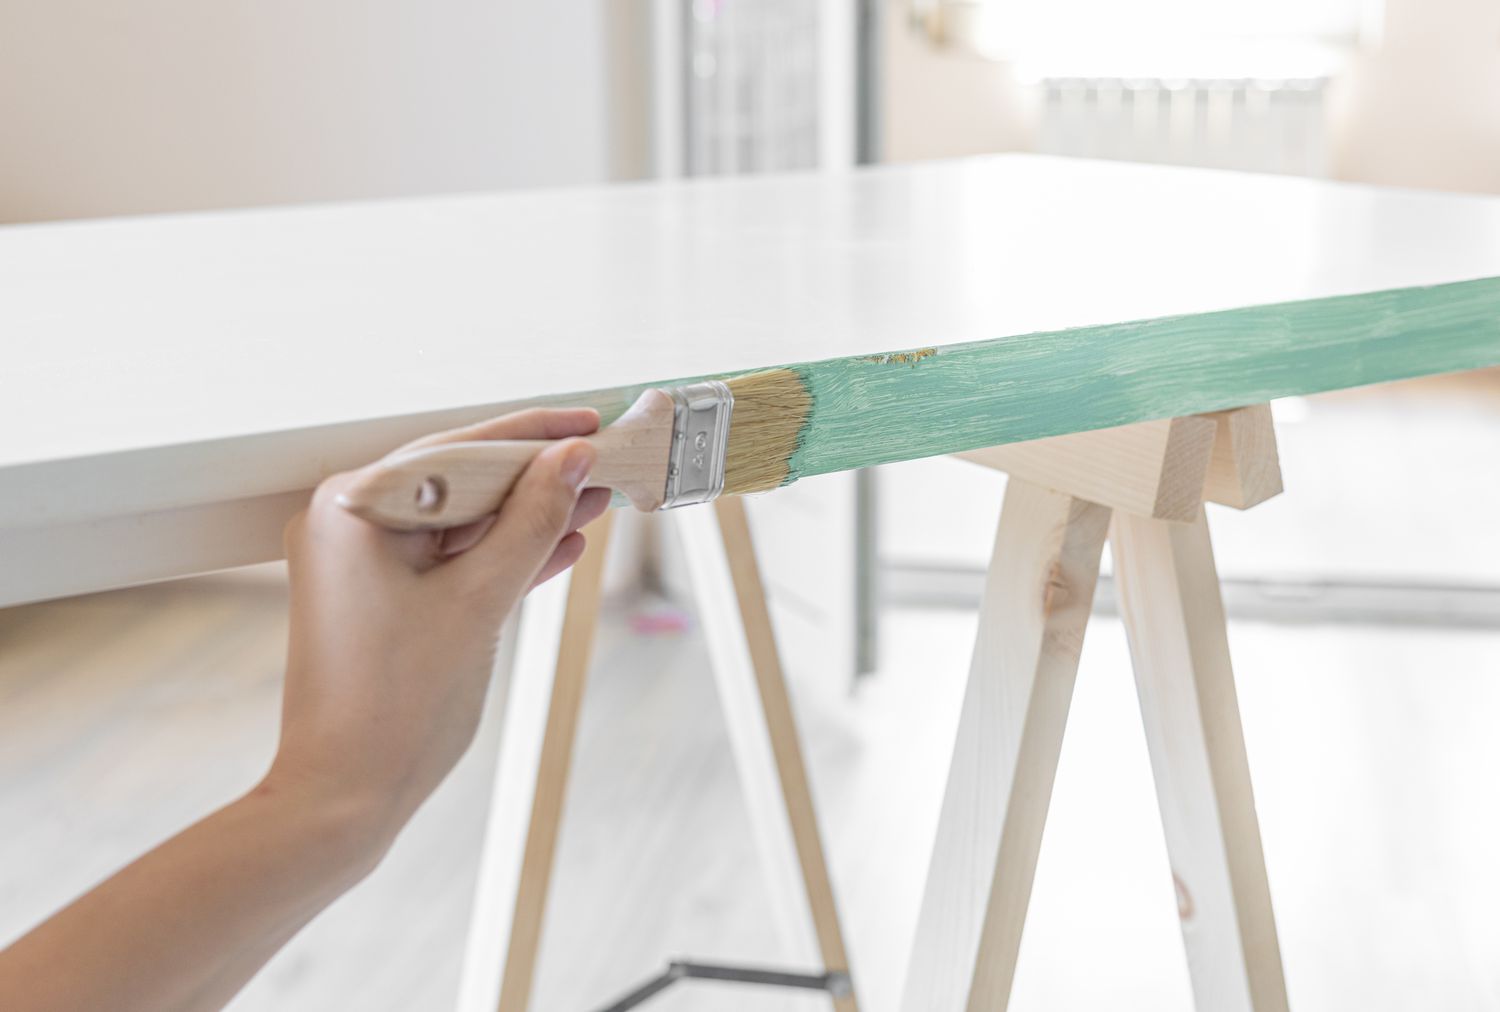 The Best Way To Paint Doors: According To Pro Painters